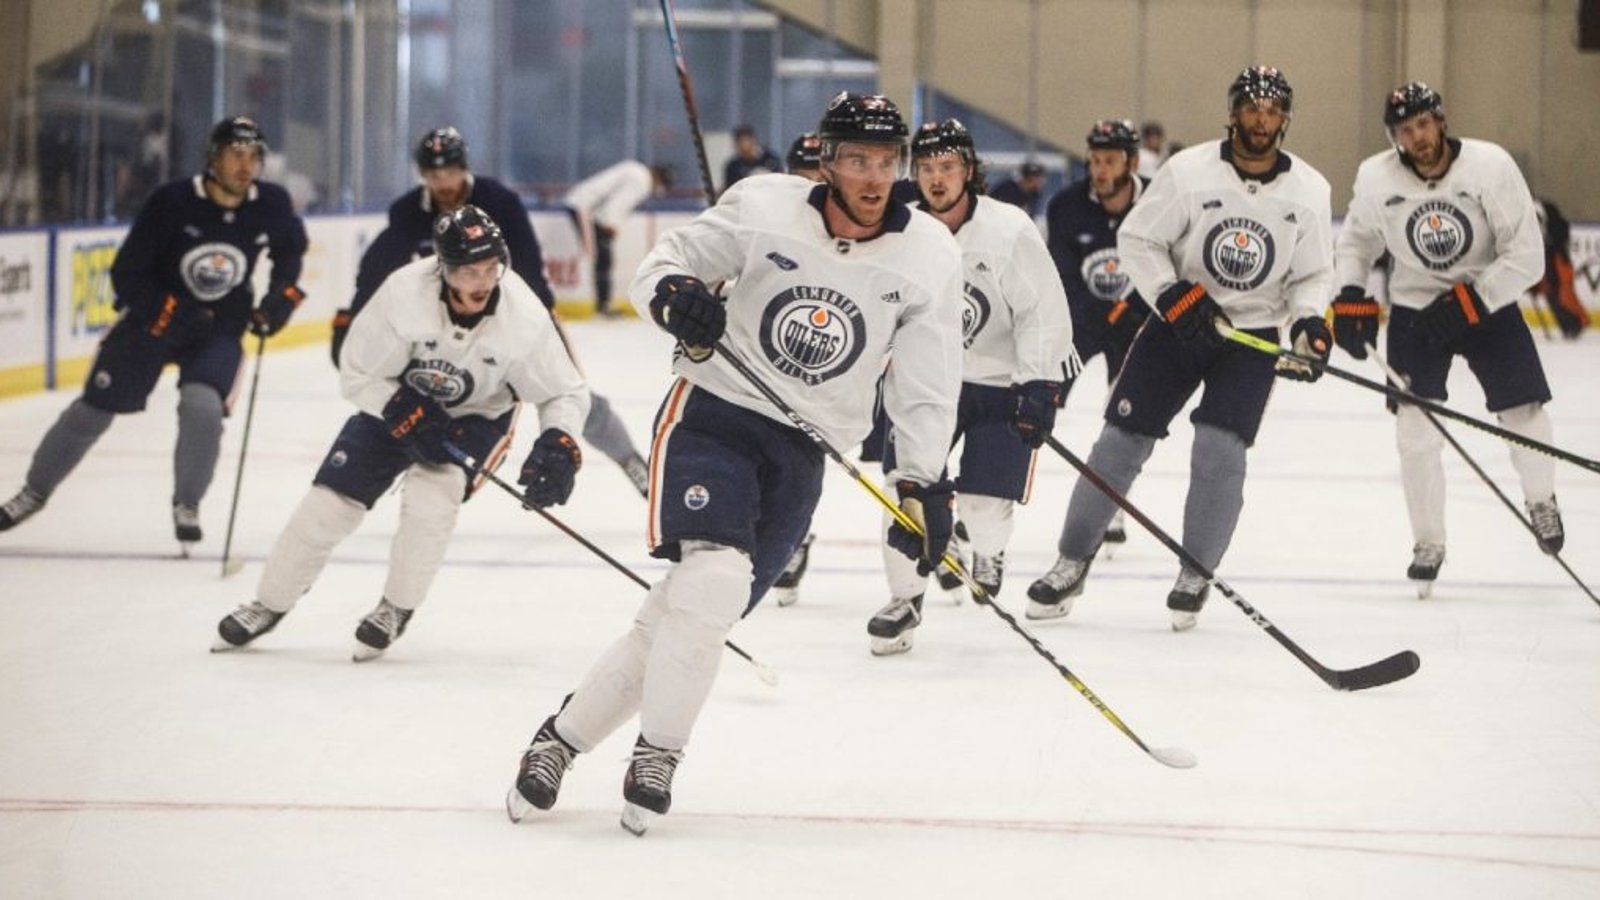 Connor McDavid gets scarier on the ice, even for his own teammates! 